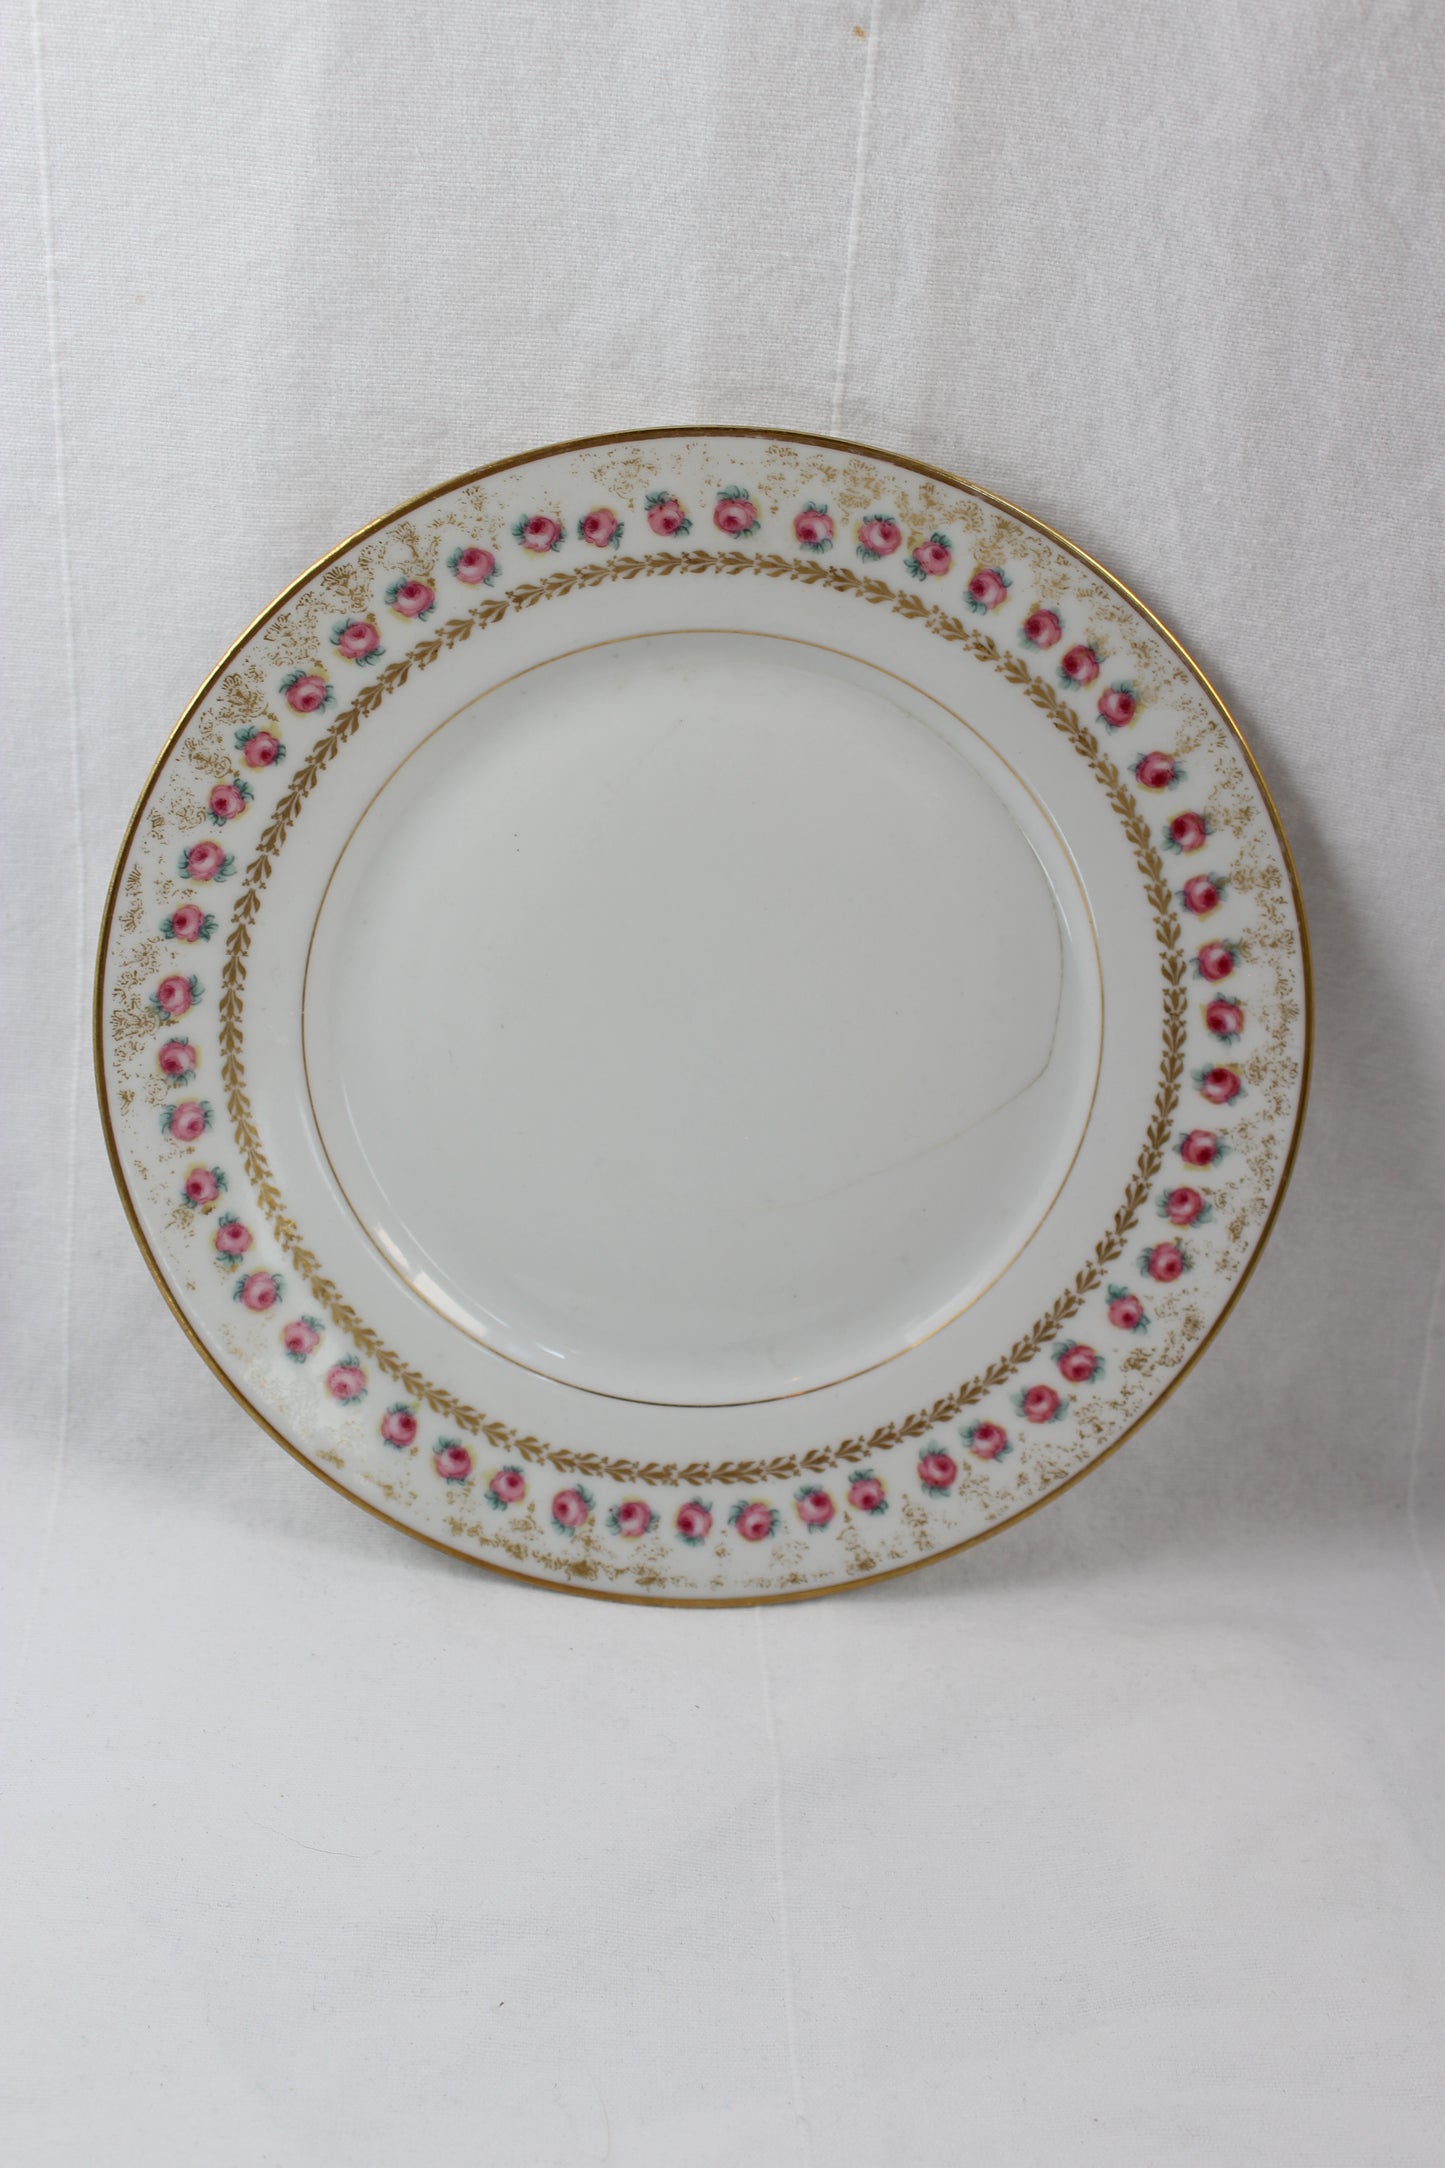 Flowered French Limoge plate